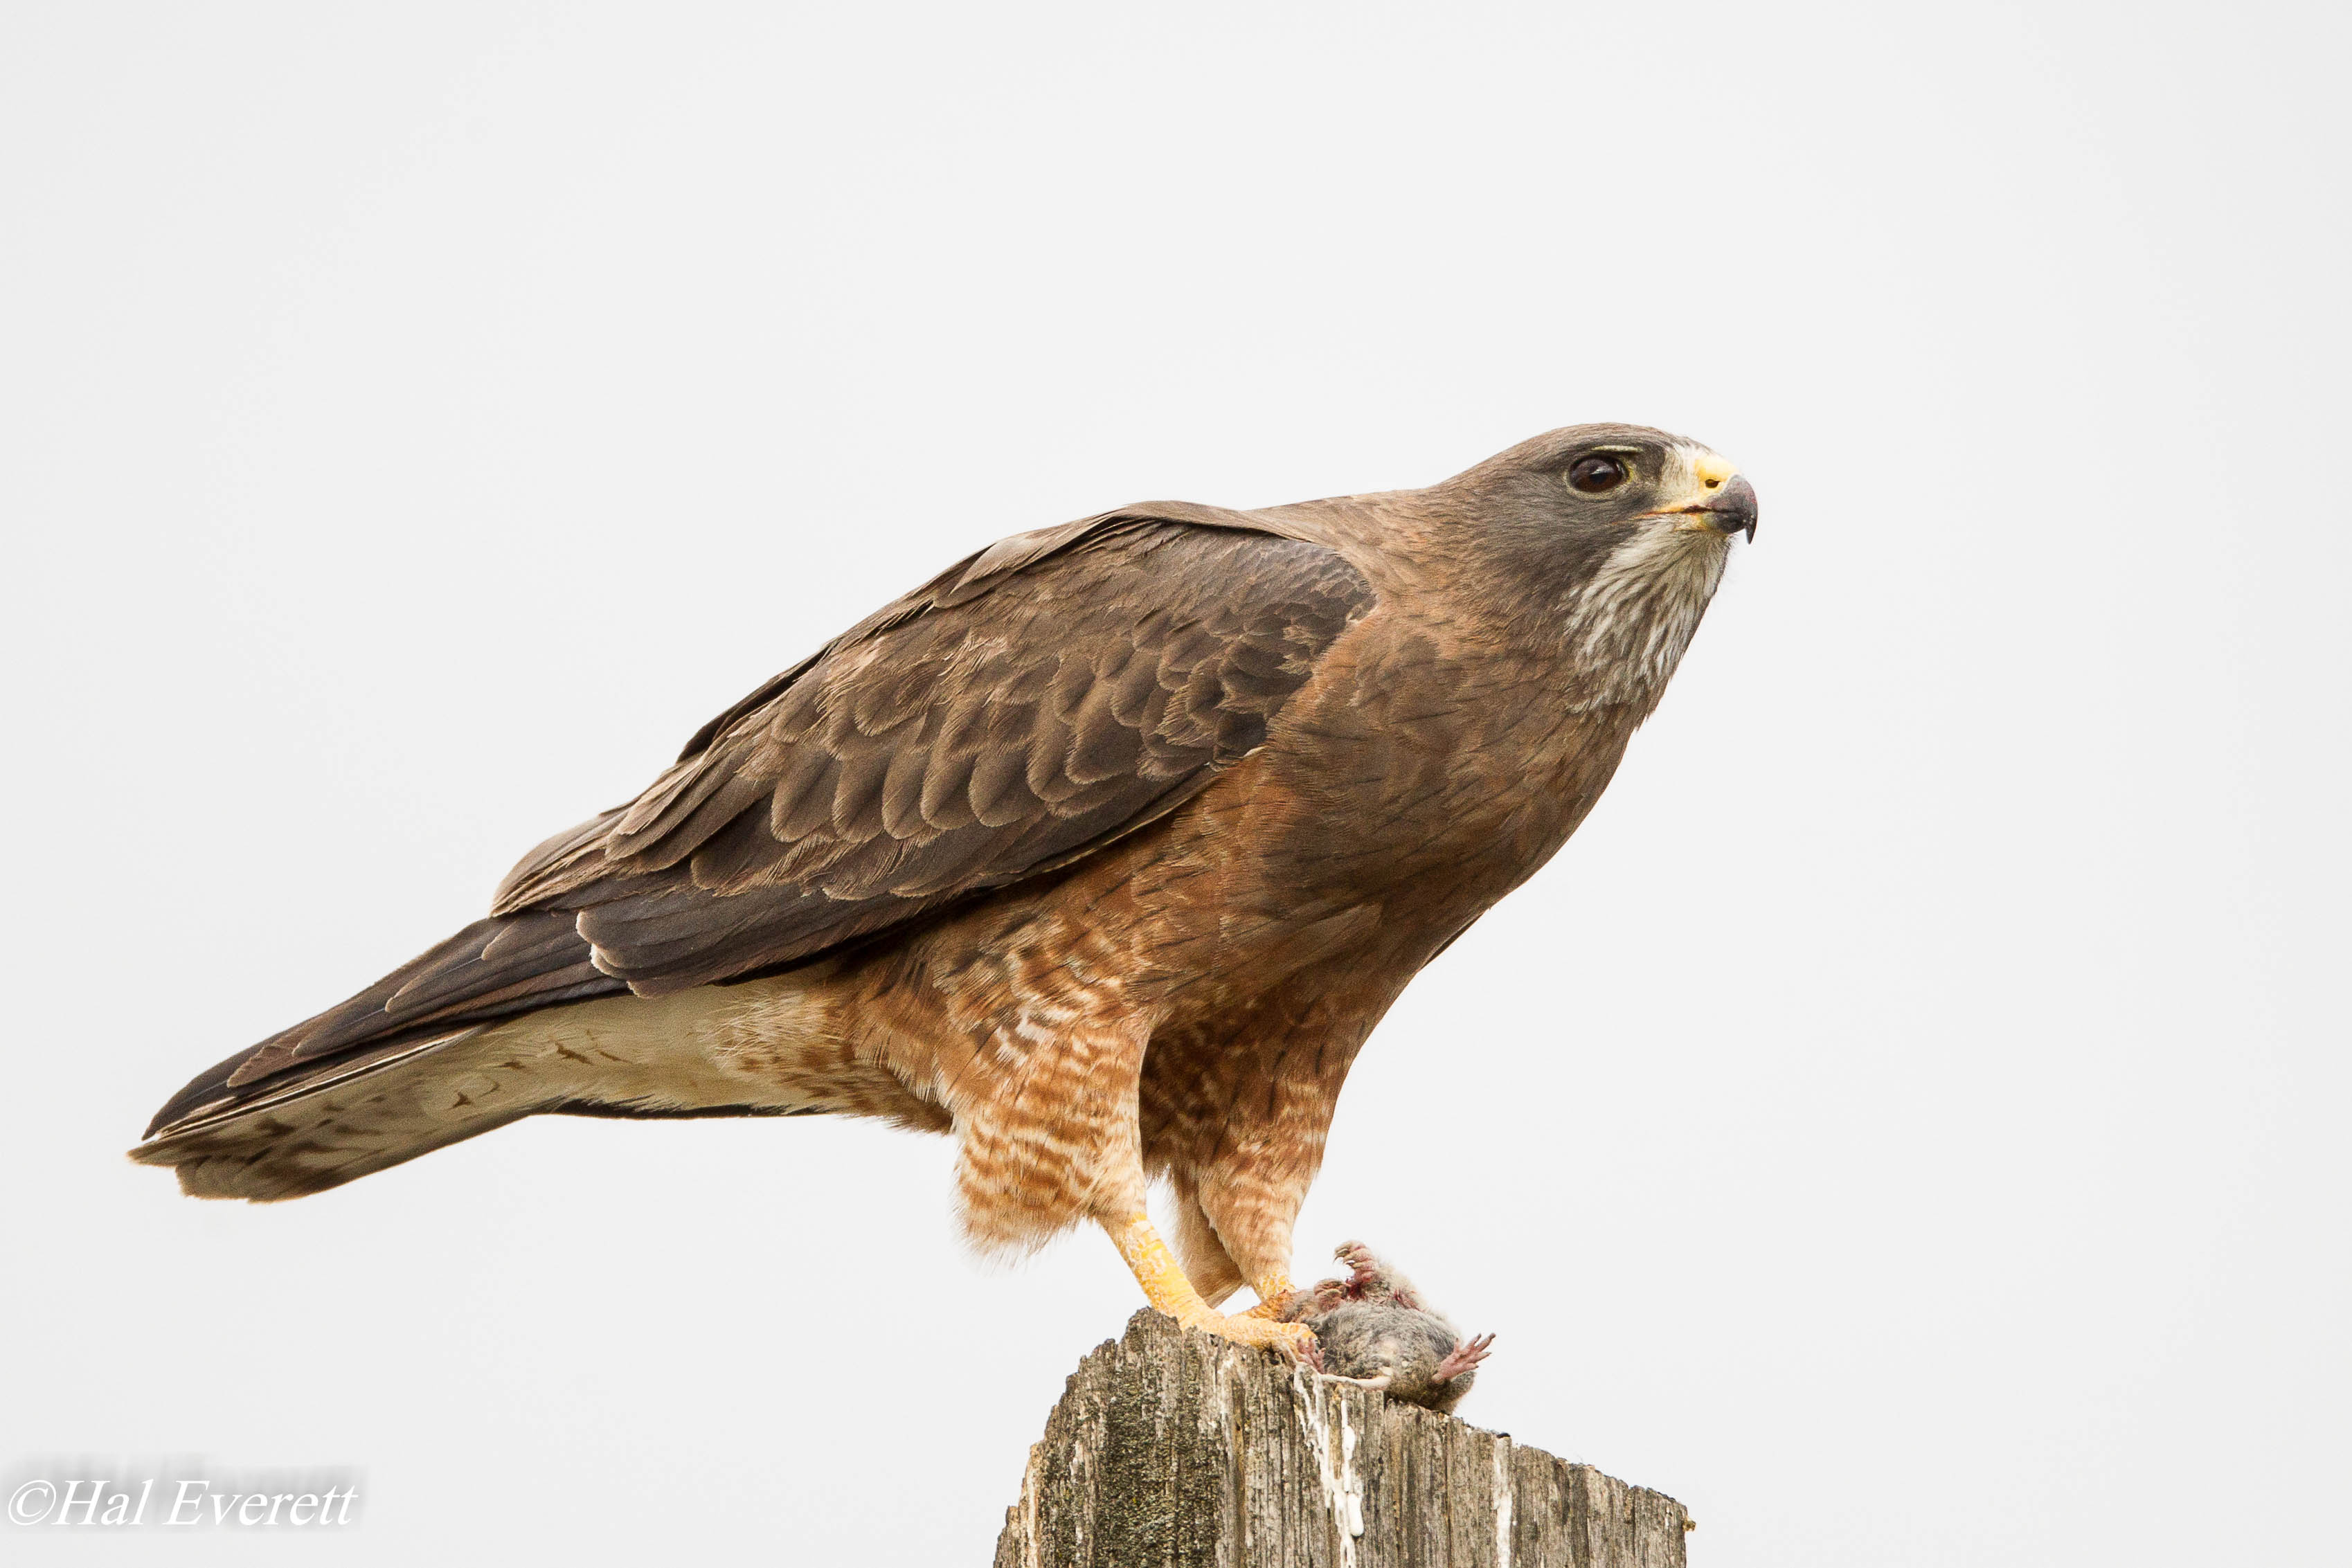 Swainsons Hawk and Meal